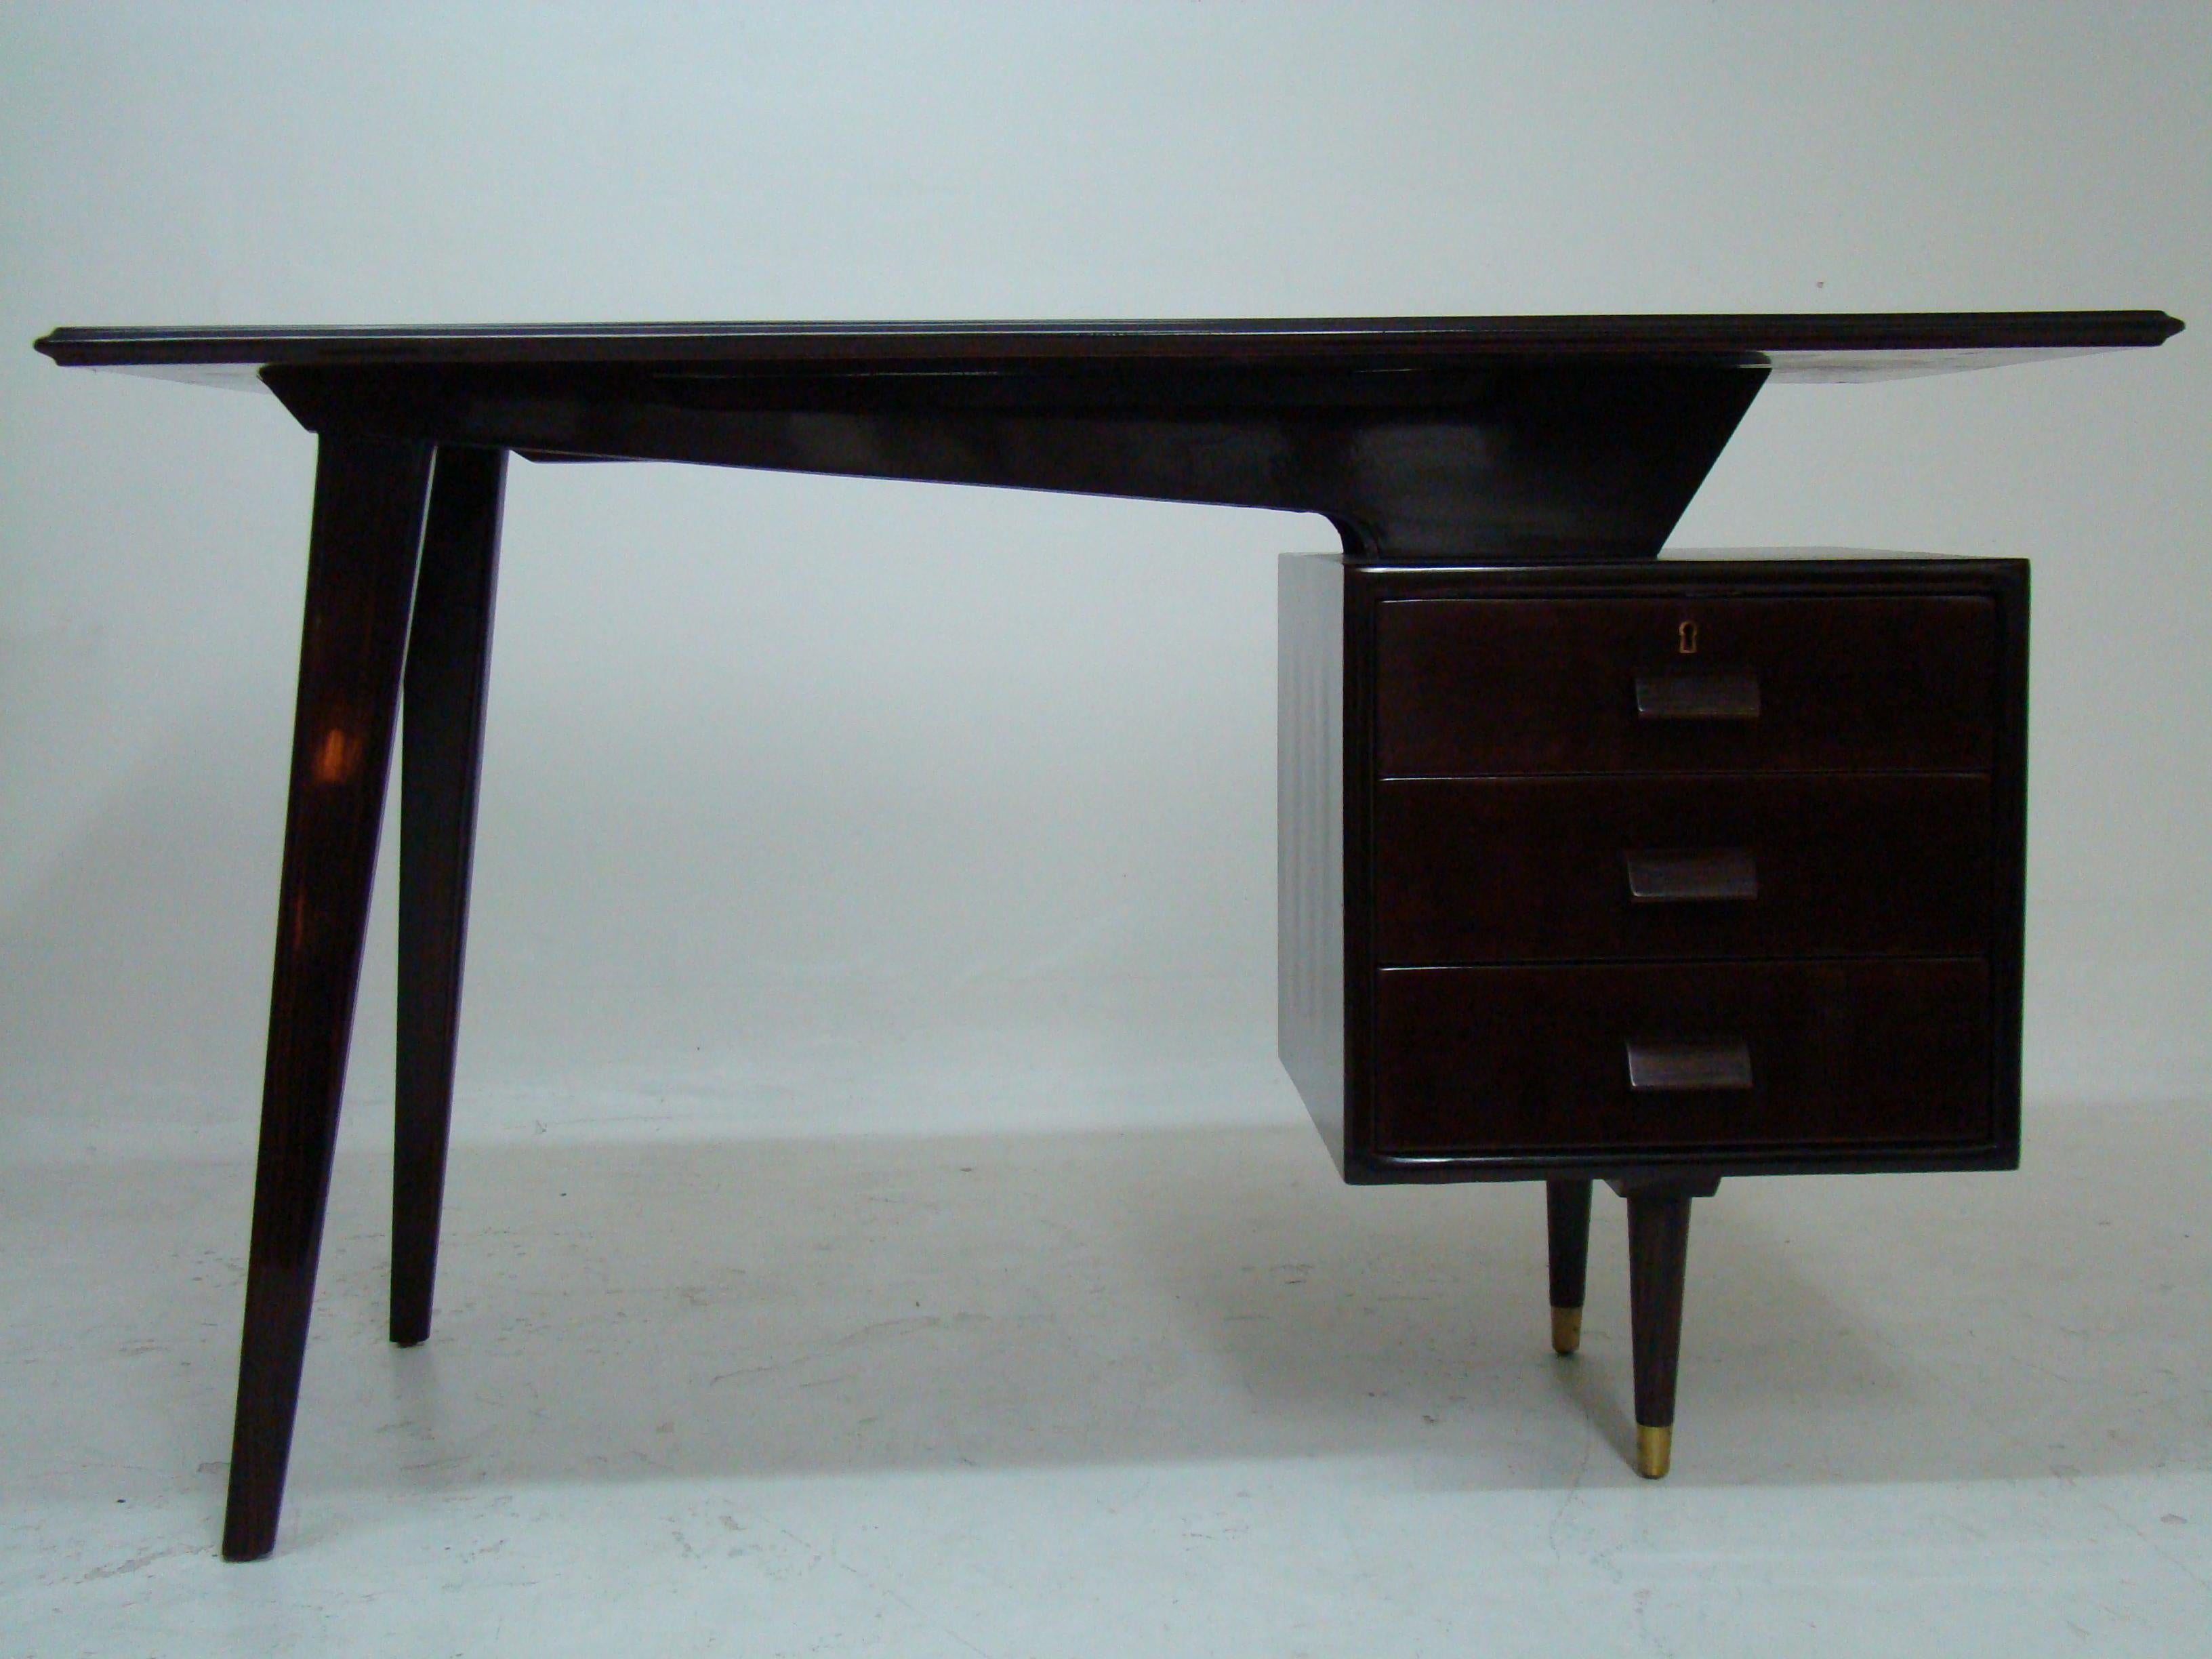 French Desk style: Art Deco
Year: 1940
Material: Wood and bronze
It is an elegant and sophisticated dream desk. 
The quality of the furniture and the exotic wood used make it unique. It is an icon of distinction.
You want to live in the golden